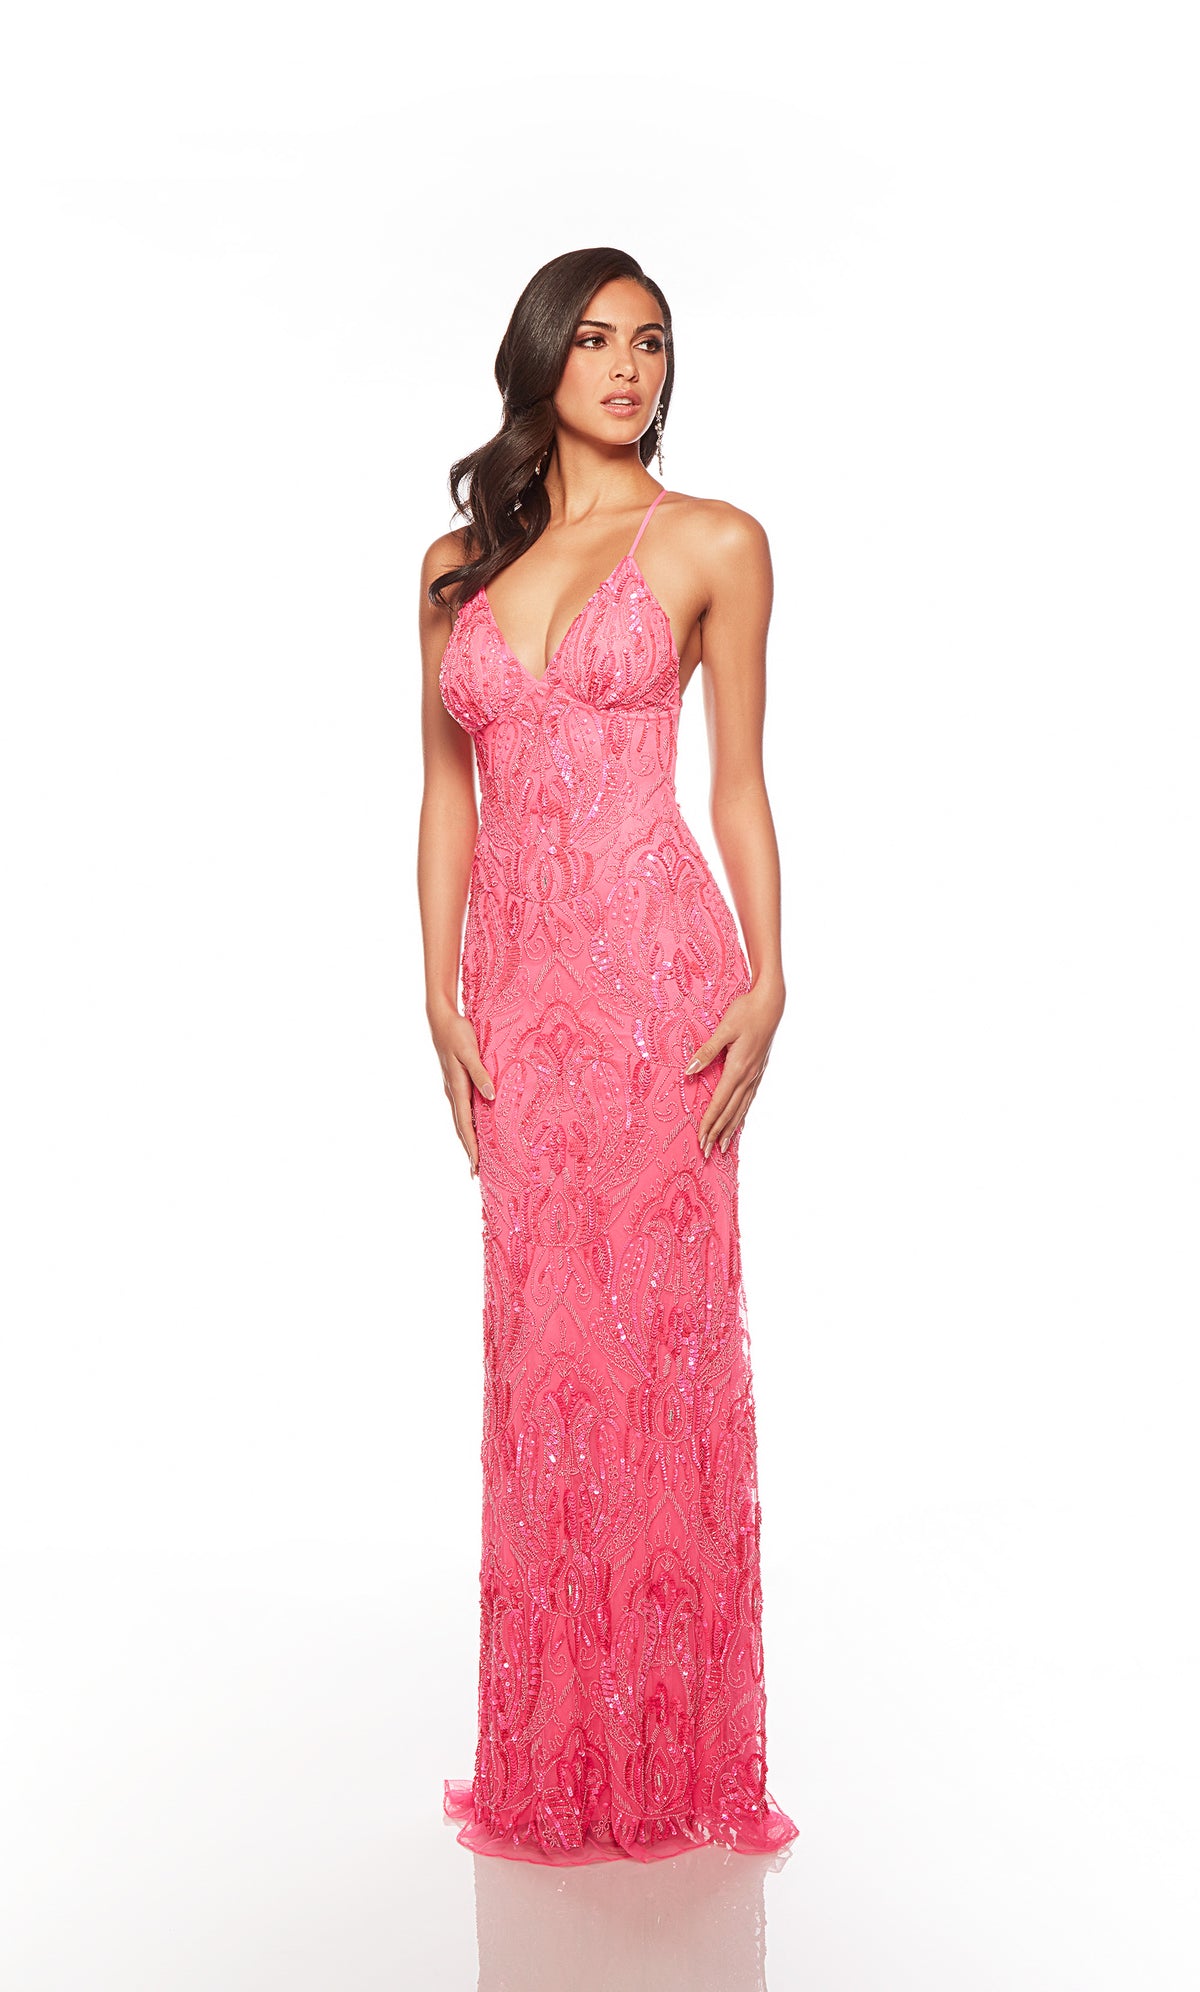 Elegant pink formal gown: Hand-beaded, V neckline, spaghetti straps, strappy back, and intricate paisley-patterned design for an chic and sophisticated look.